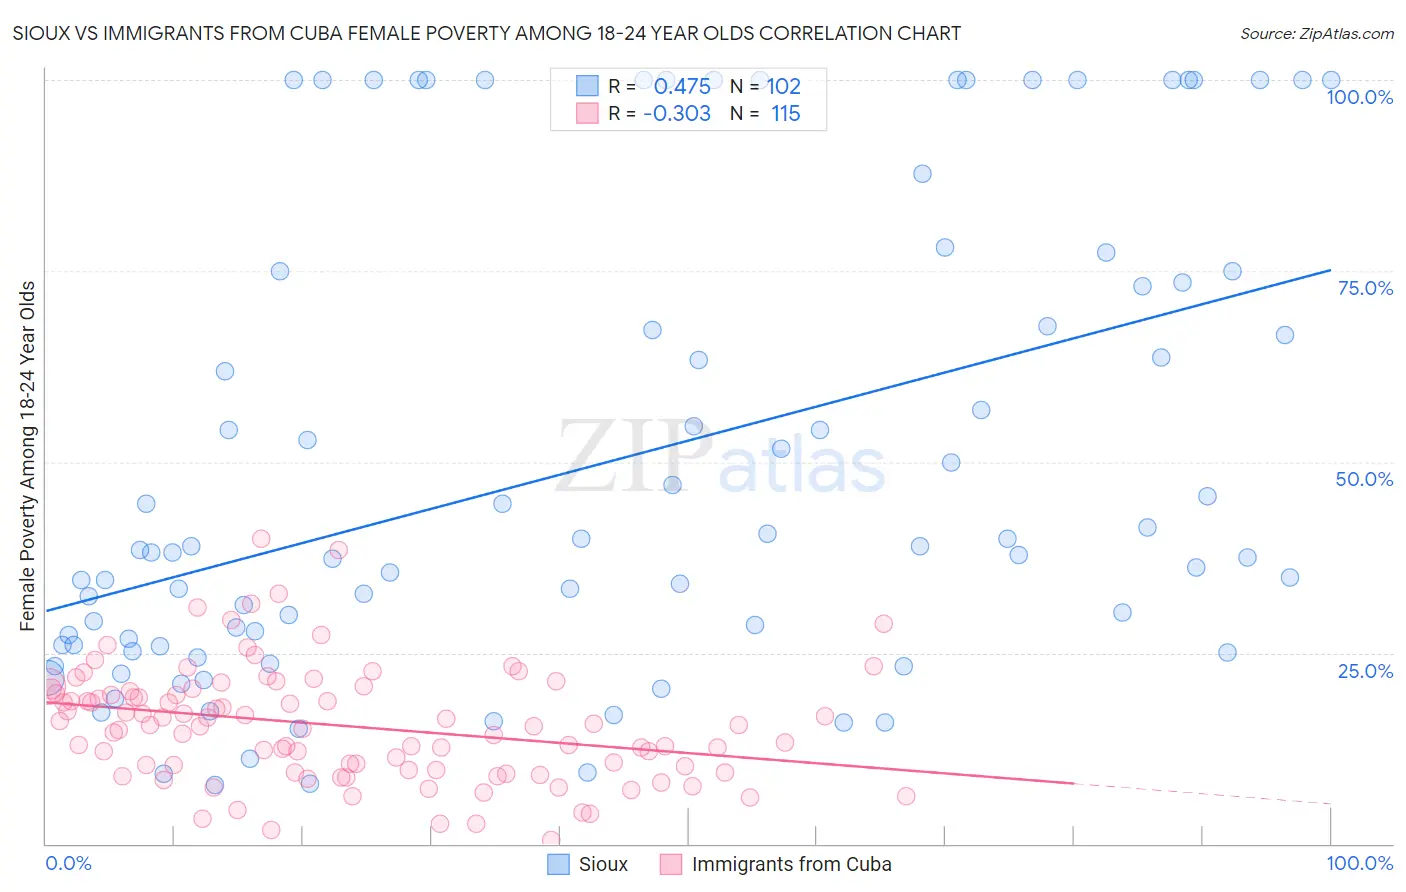 Sioux vs Immigrants from Cuba Female Poverty Among 18-24 Year Olds